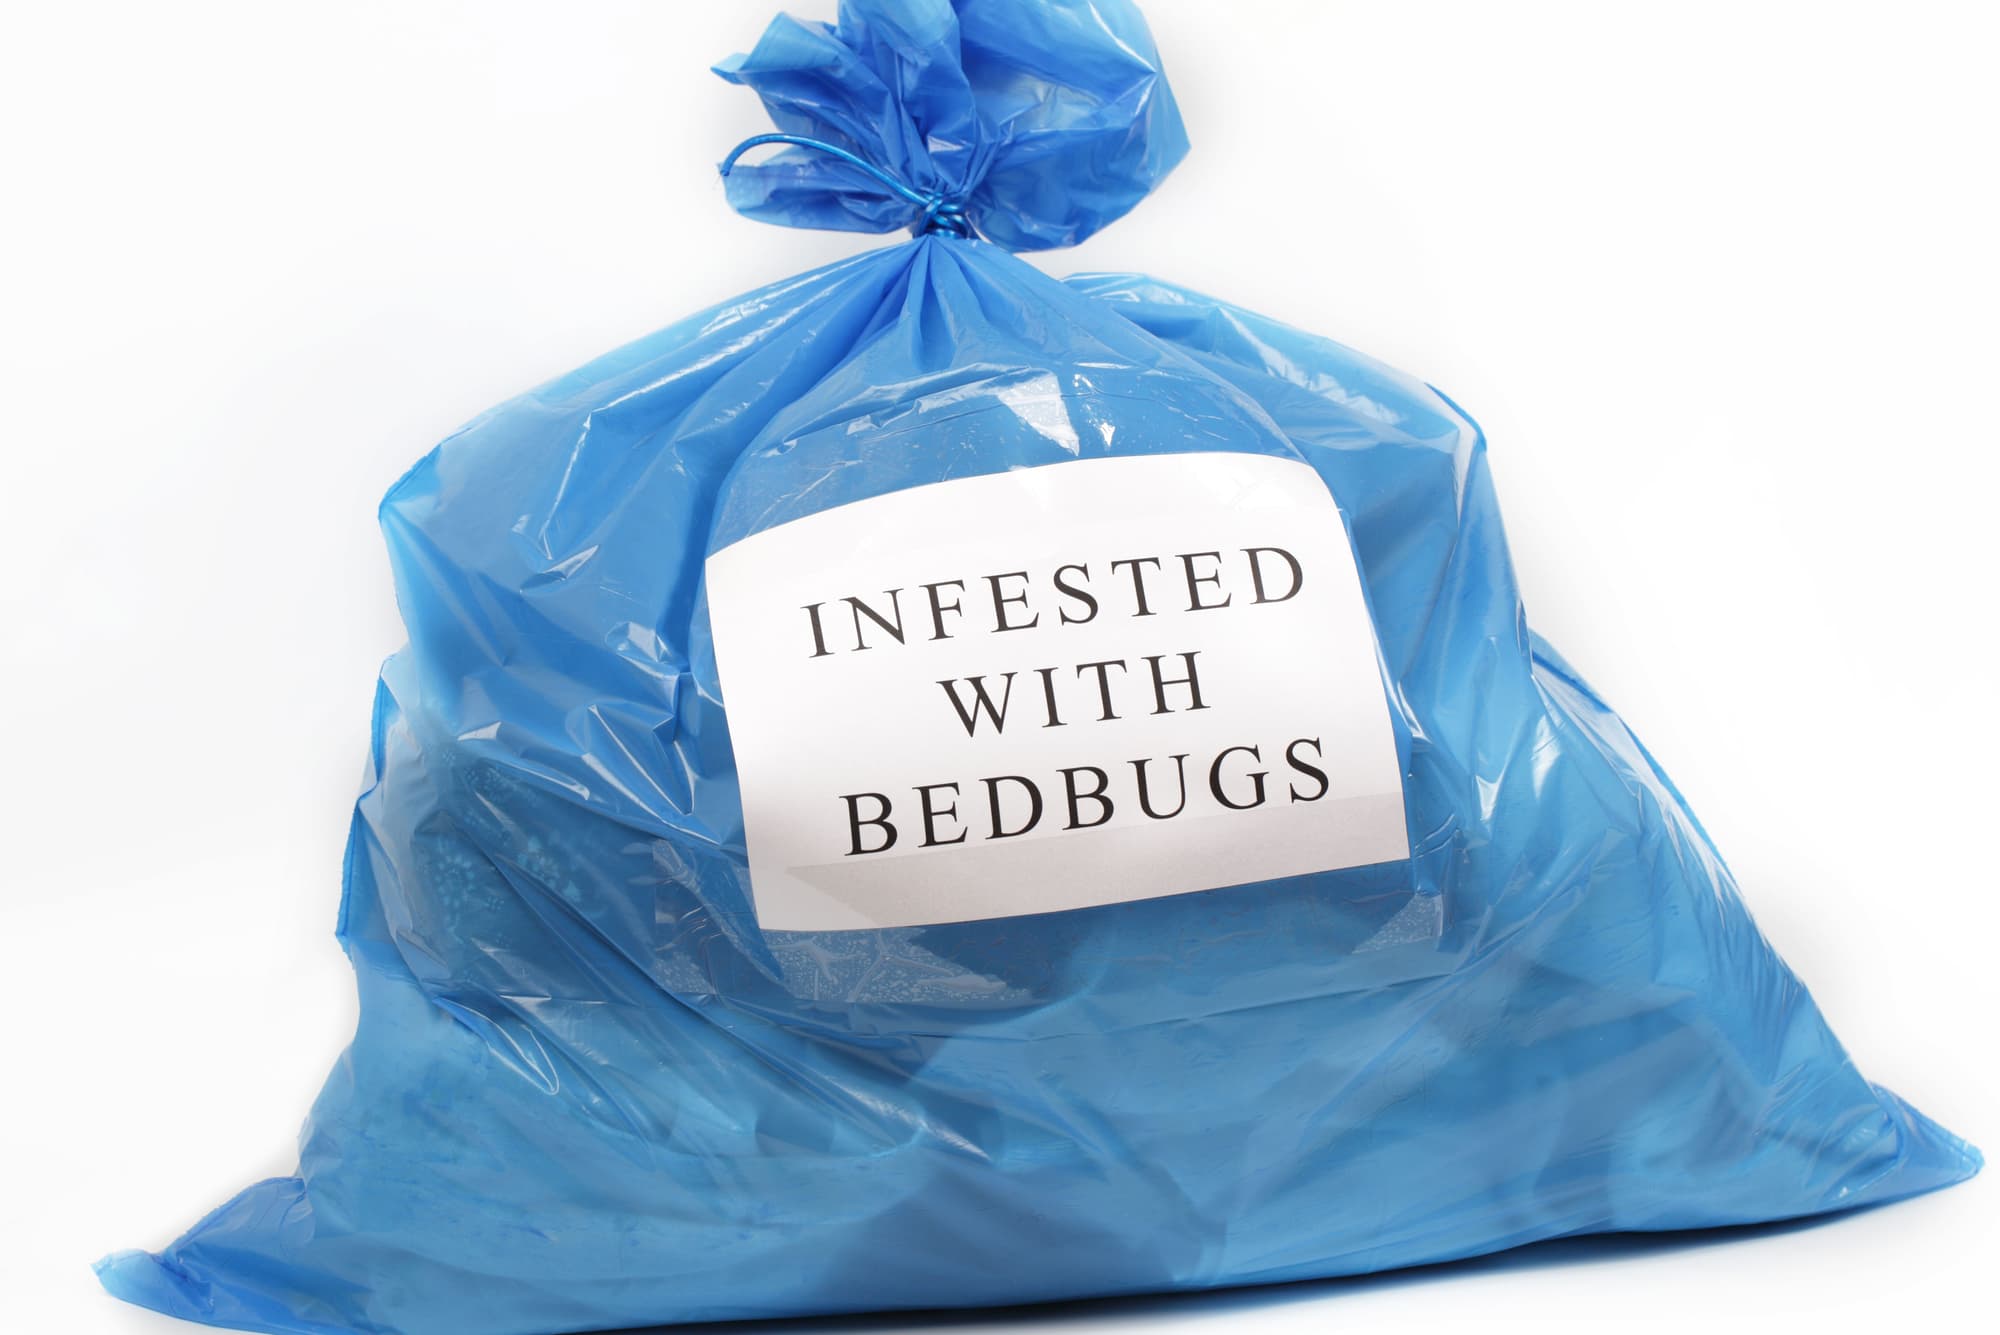 garbage bag filled with clothes that may have bed bugs